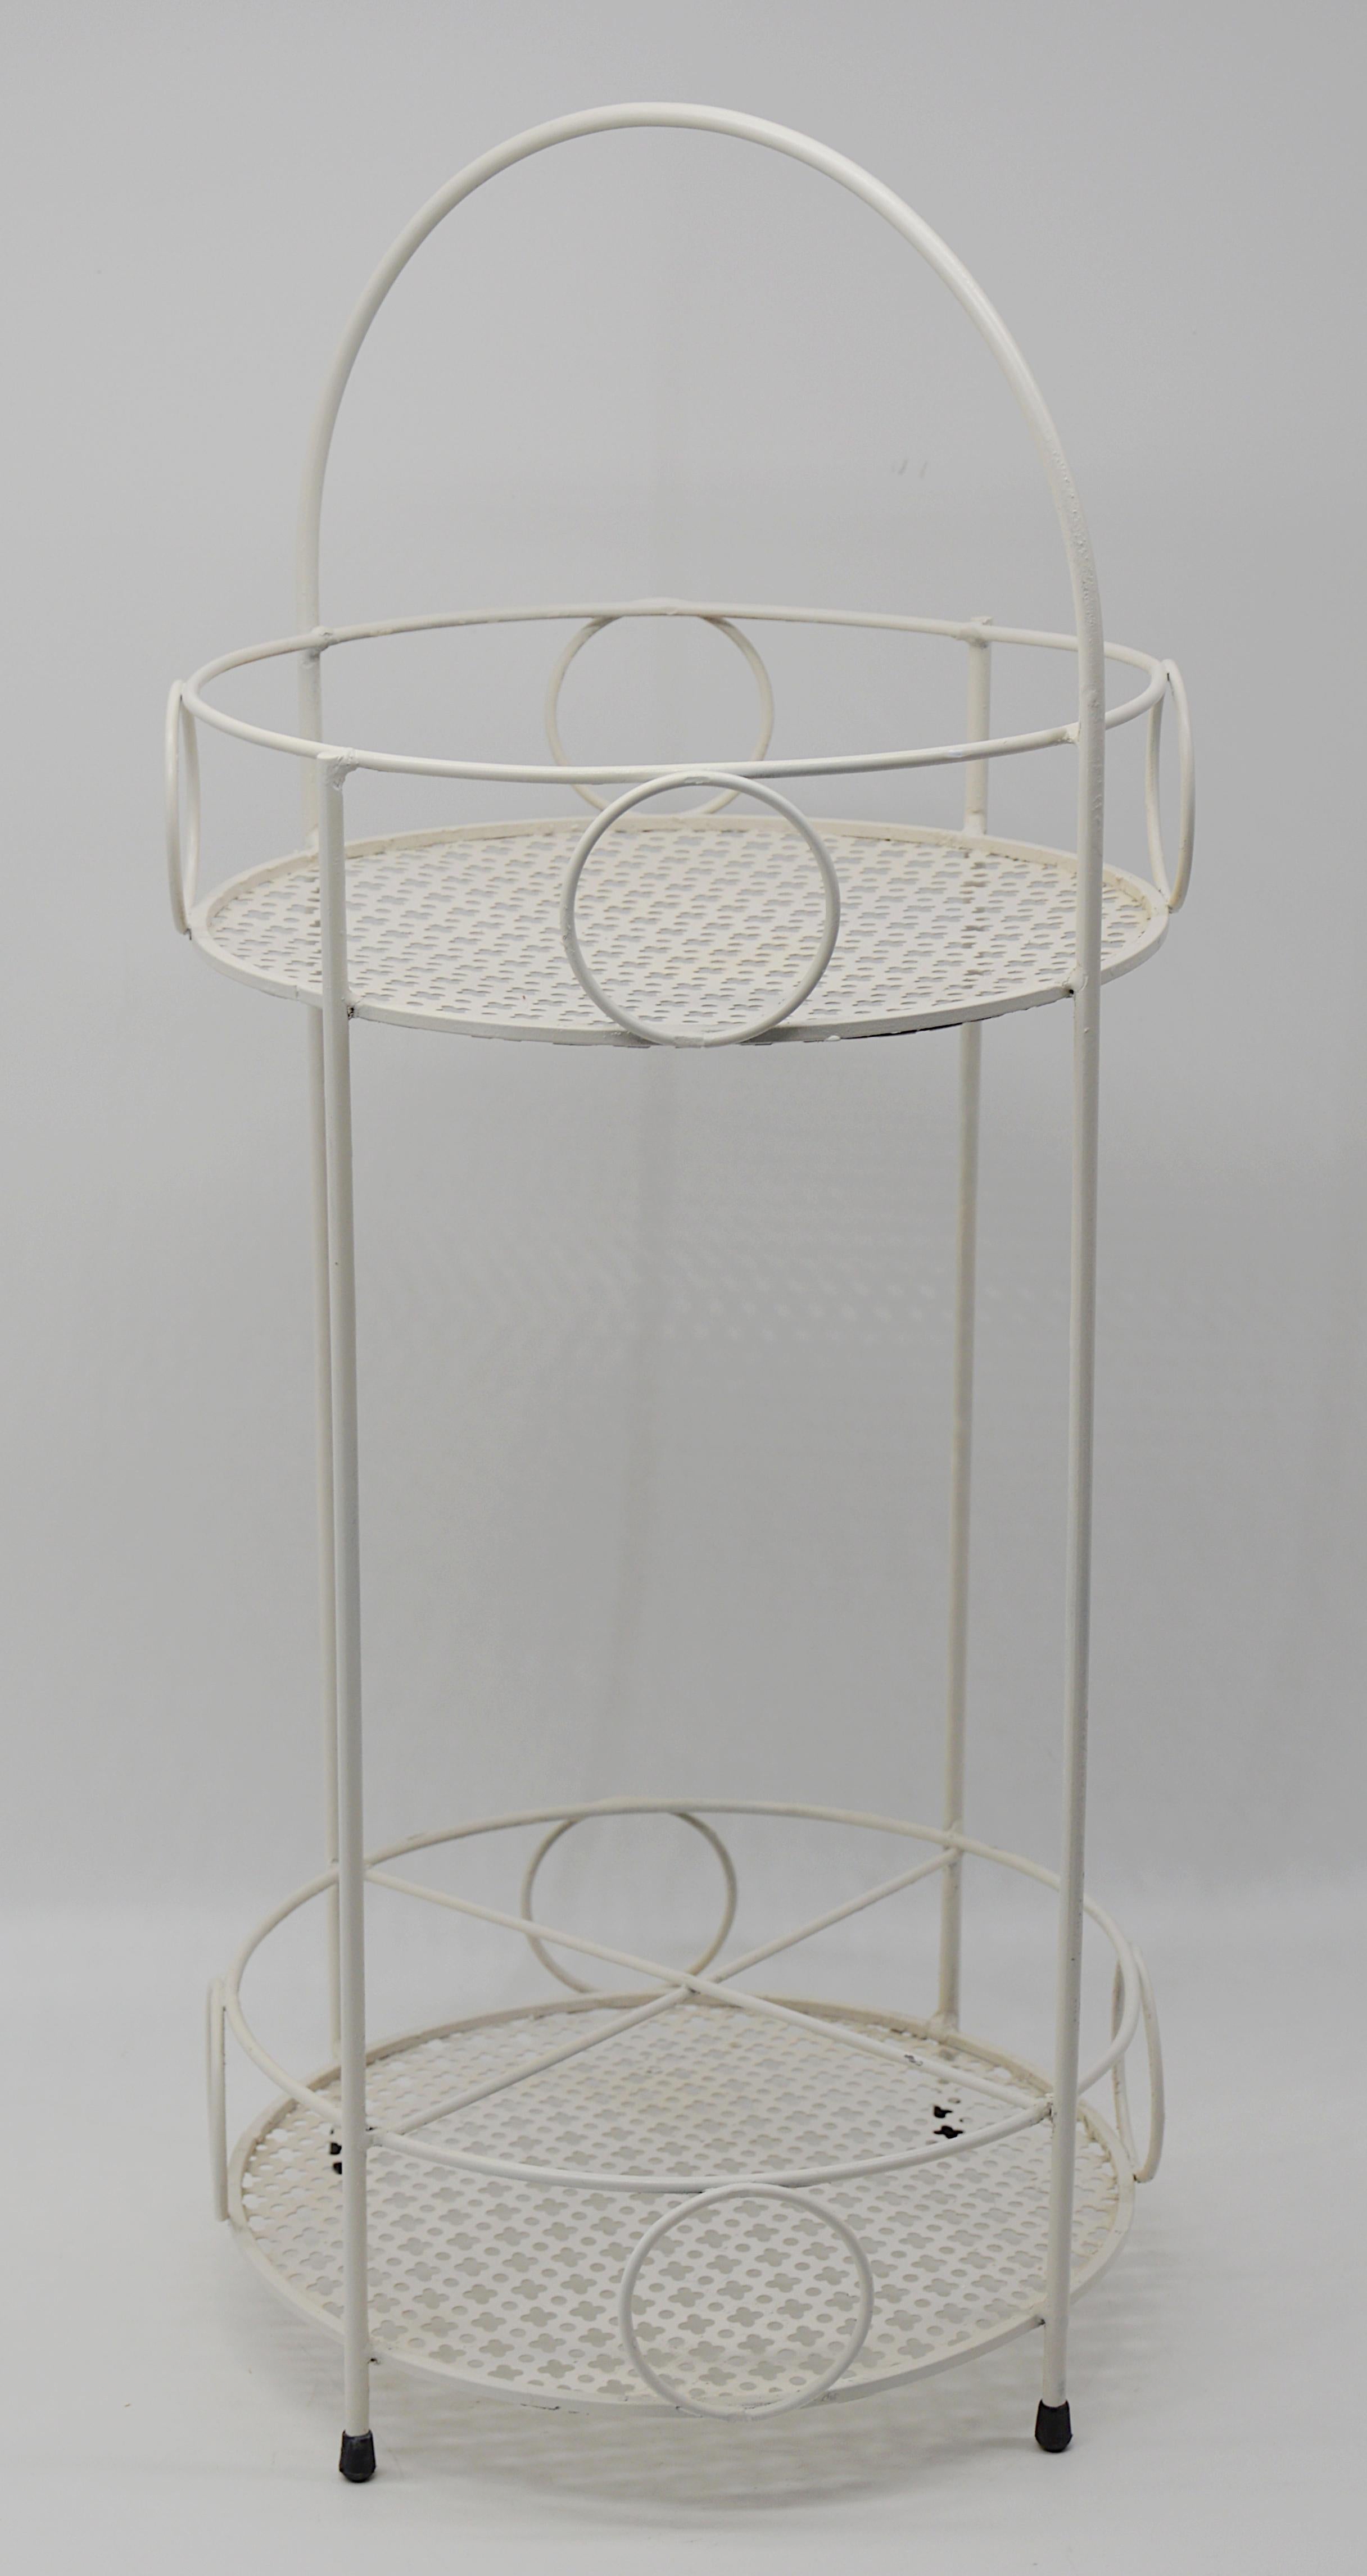 Midcentury small bar table by Mathieu Matégot, France, 1950s. Metal and perforated metal. Measures: height : 23.6